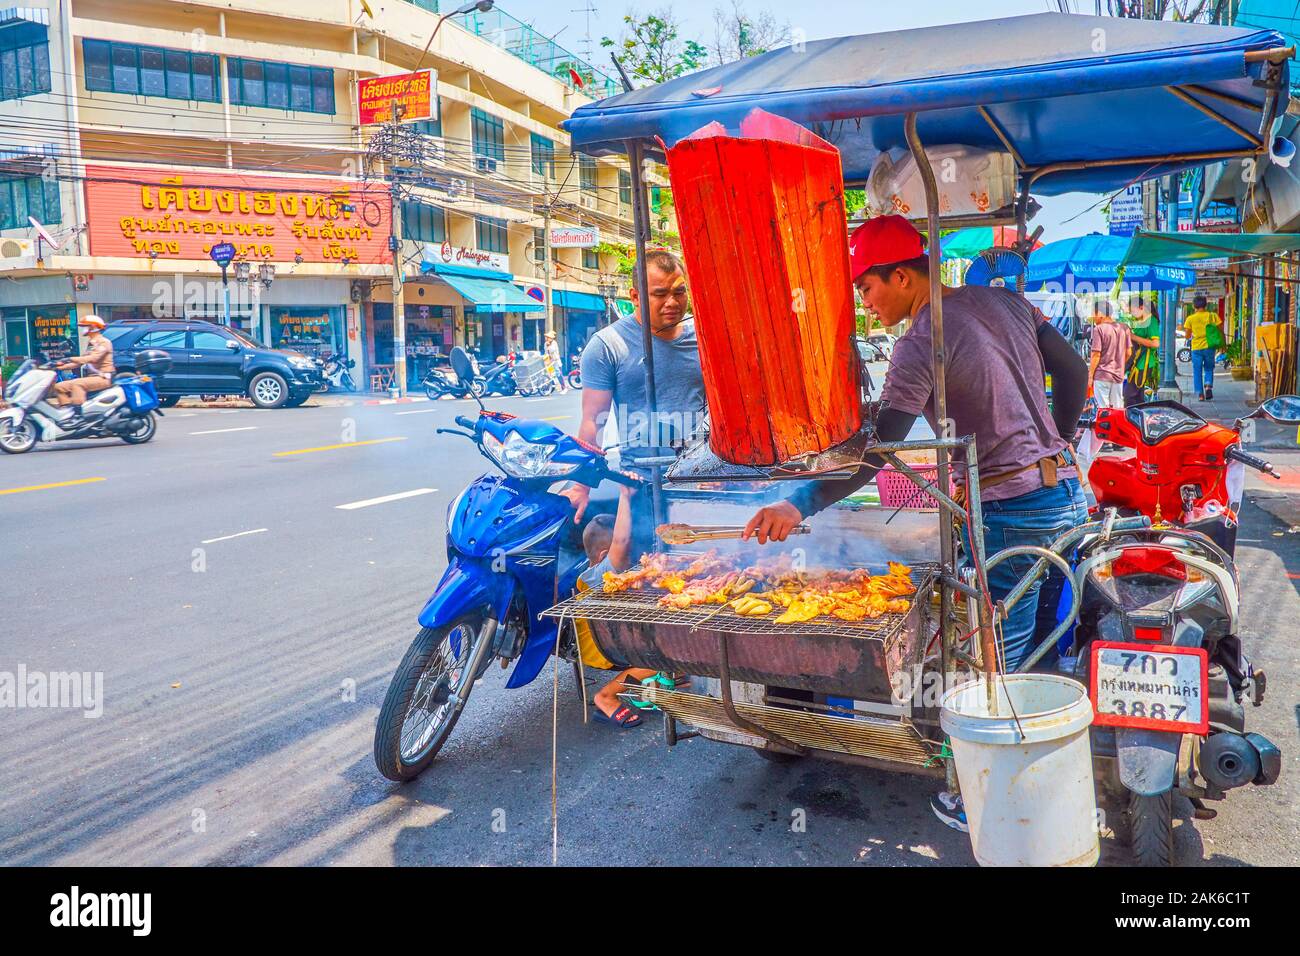 BANGKOK, THAILAND - APRIL 15, 2019: The young cook prepares street food snacks on the hand-made grill, mounted on the bike in old town, on April 15 in Stock Photo